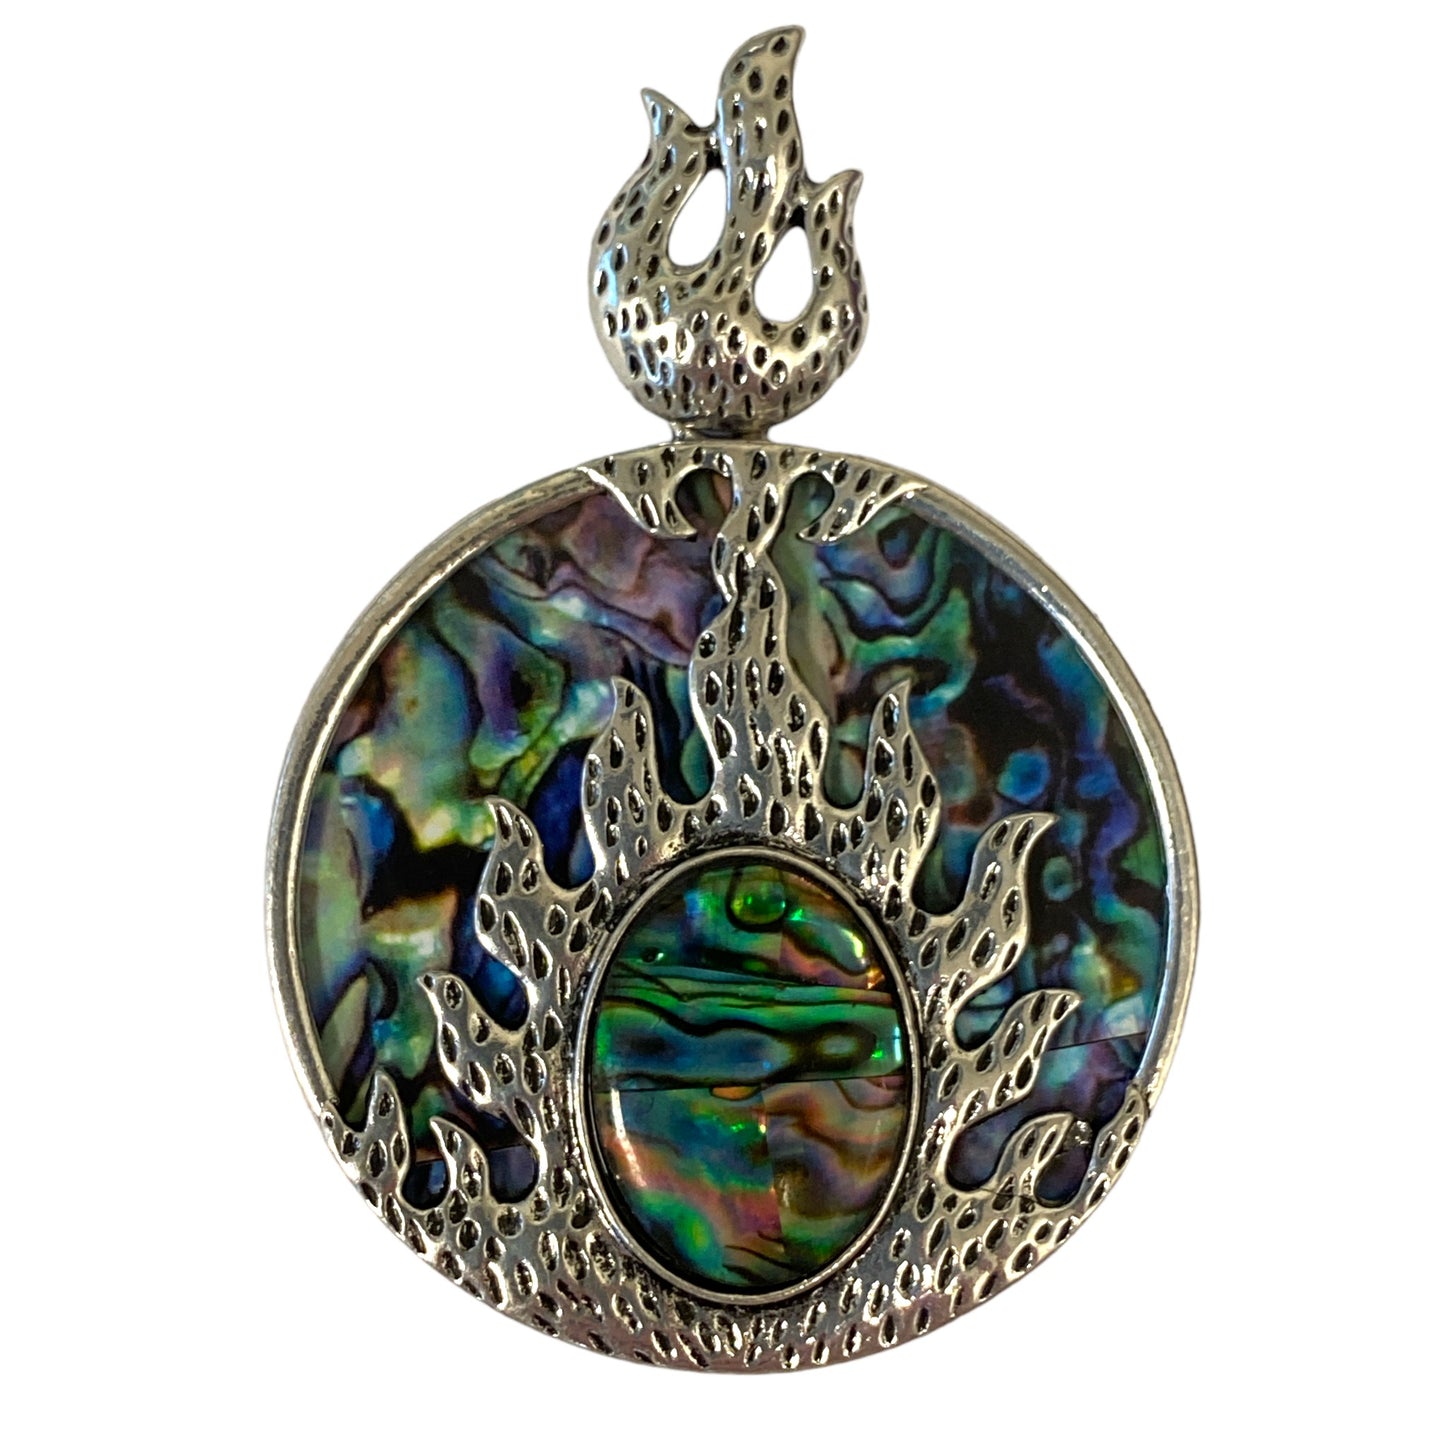 Round Flame Design  Pendant with Abalone Shell inlay - Silver Color Plated Metal - 45mm - China - NEW1022